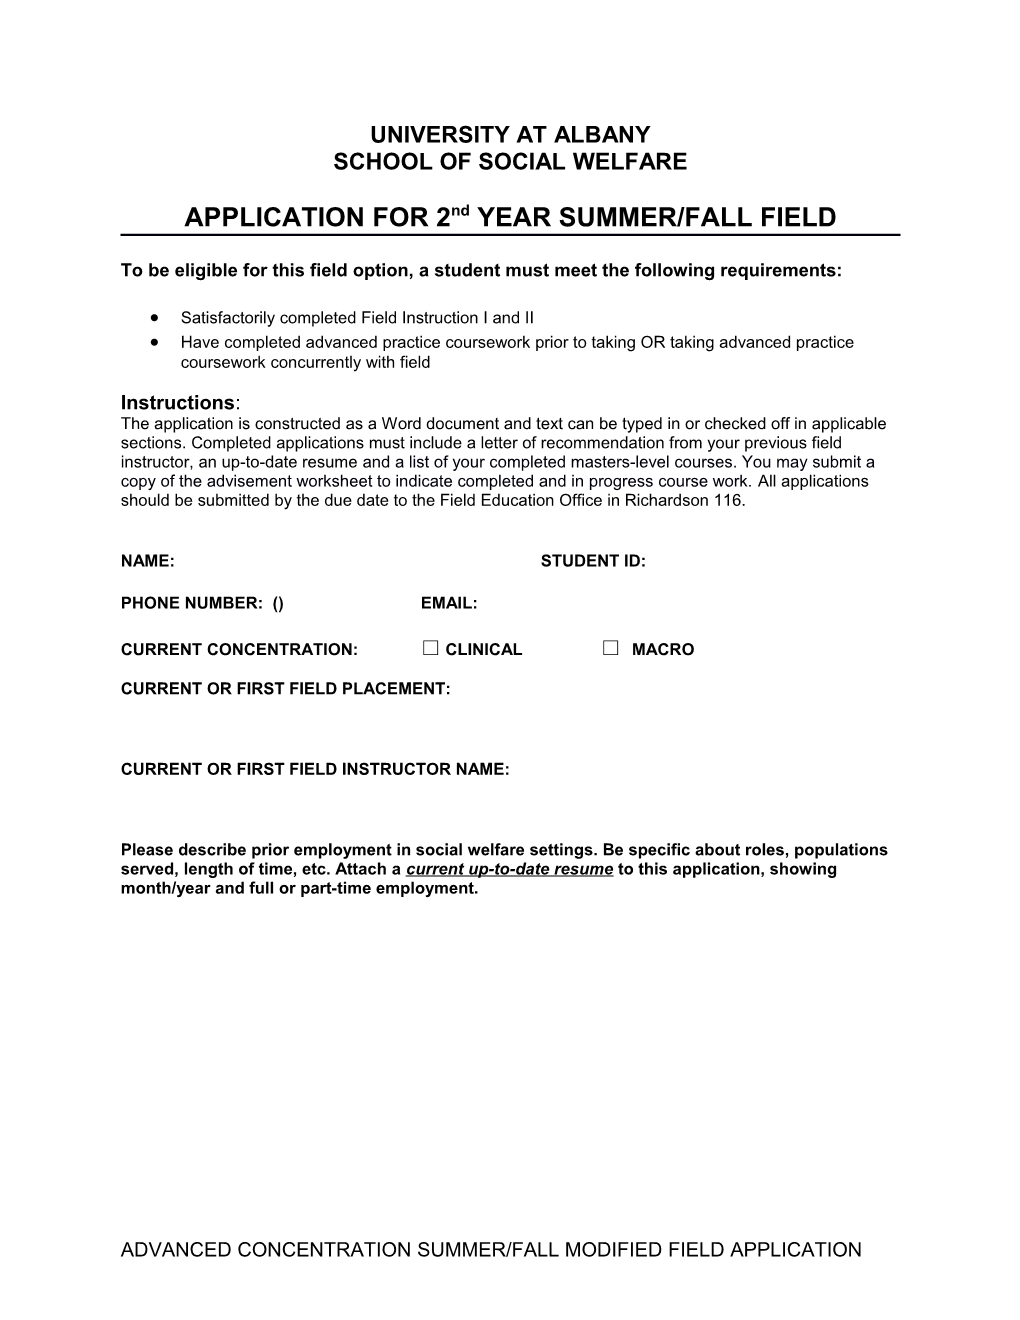 APPLICATION for 2Nd YEAR SUMMER/FALL FIELD